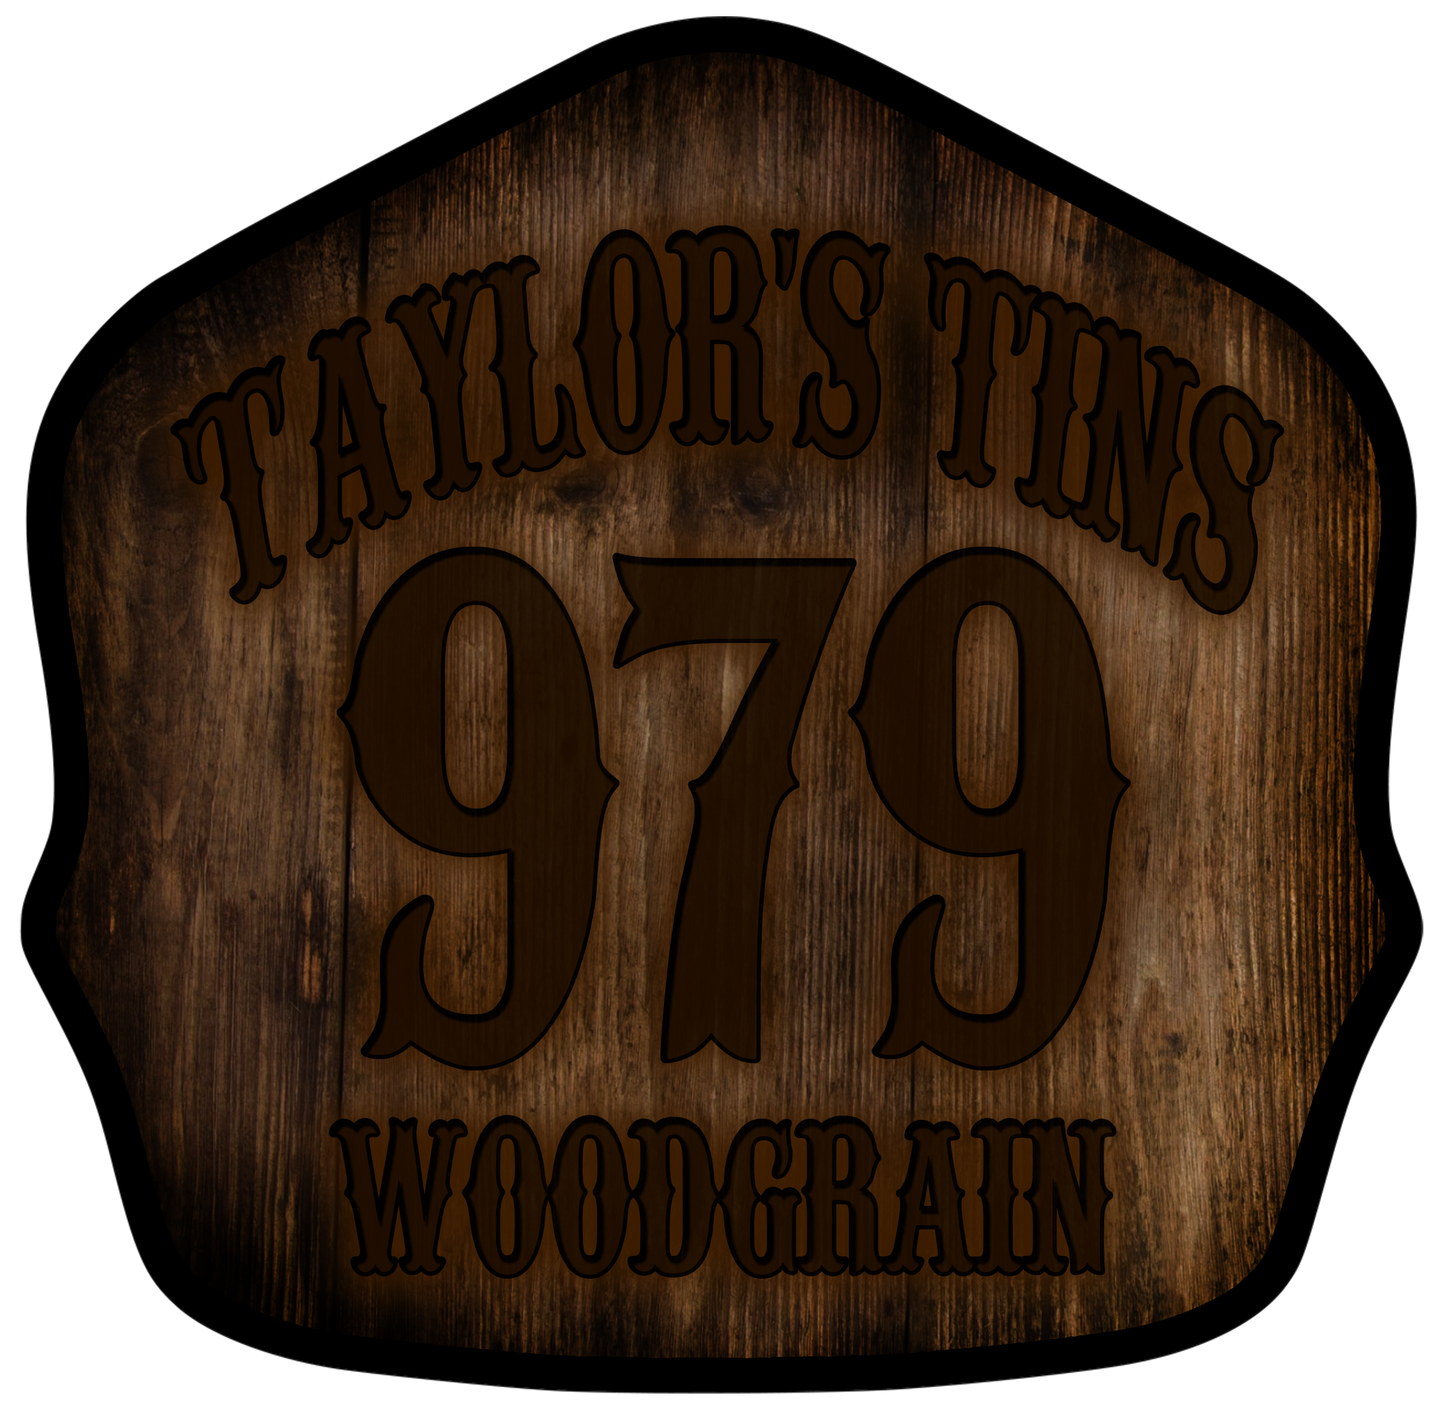 Classic Style Quick Tin-WoodGrain Background/ Black Lettering- 055 Firefighting Gear